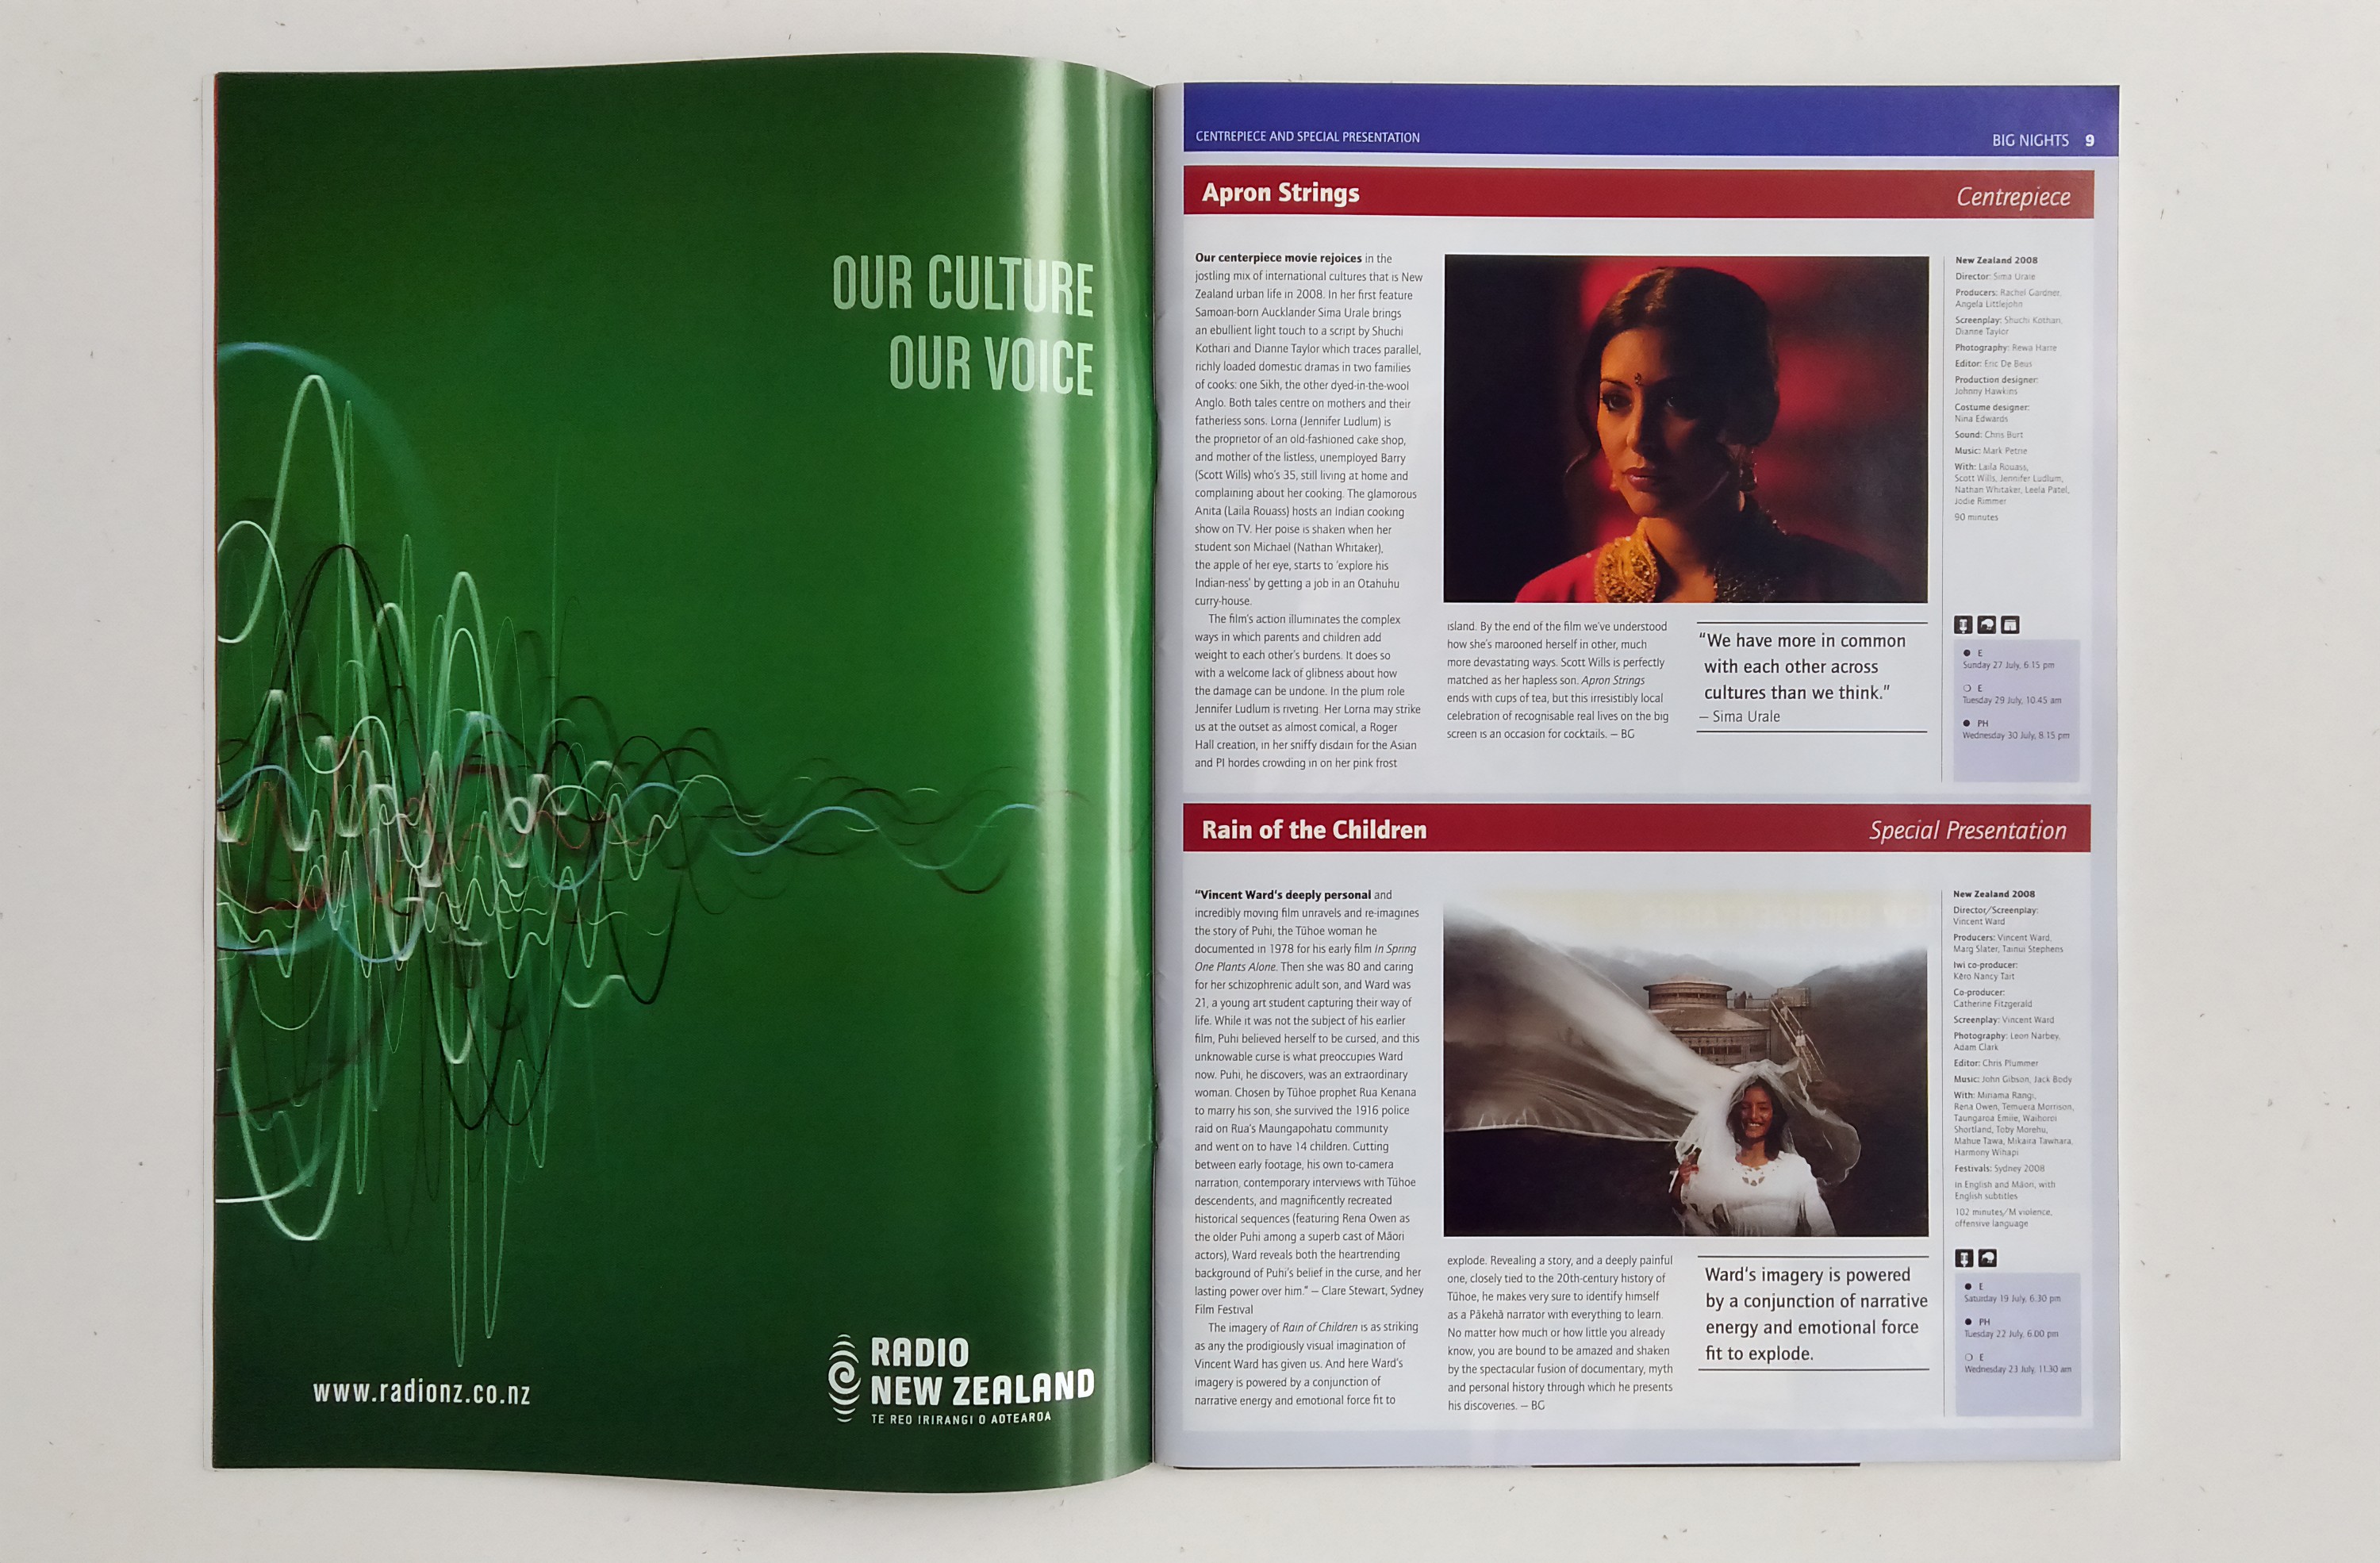 A catalogue for the New Zealand International Film Festival, open at pages 9–10, advertising the films “Apron Strings” and “Rain of the Children”.